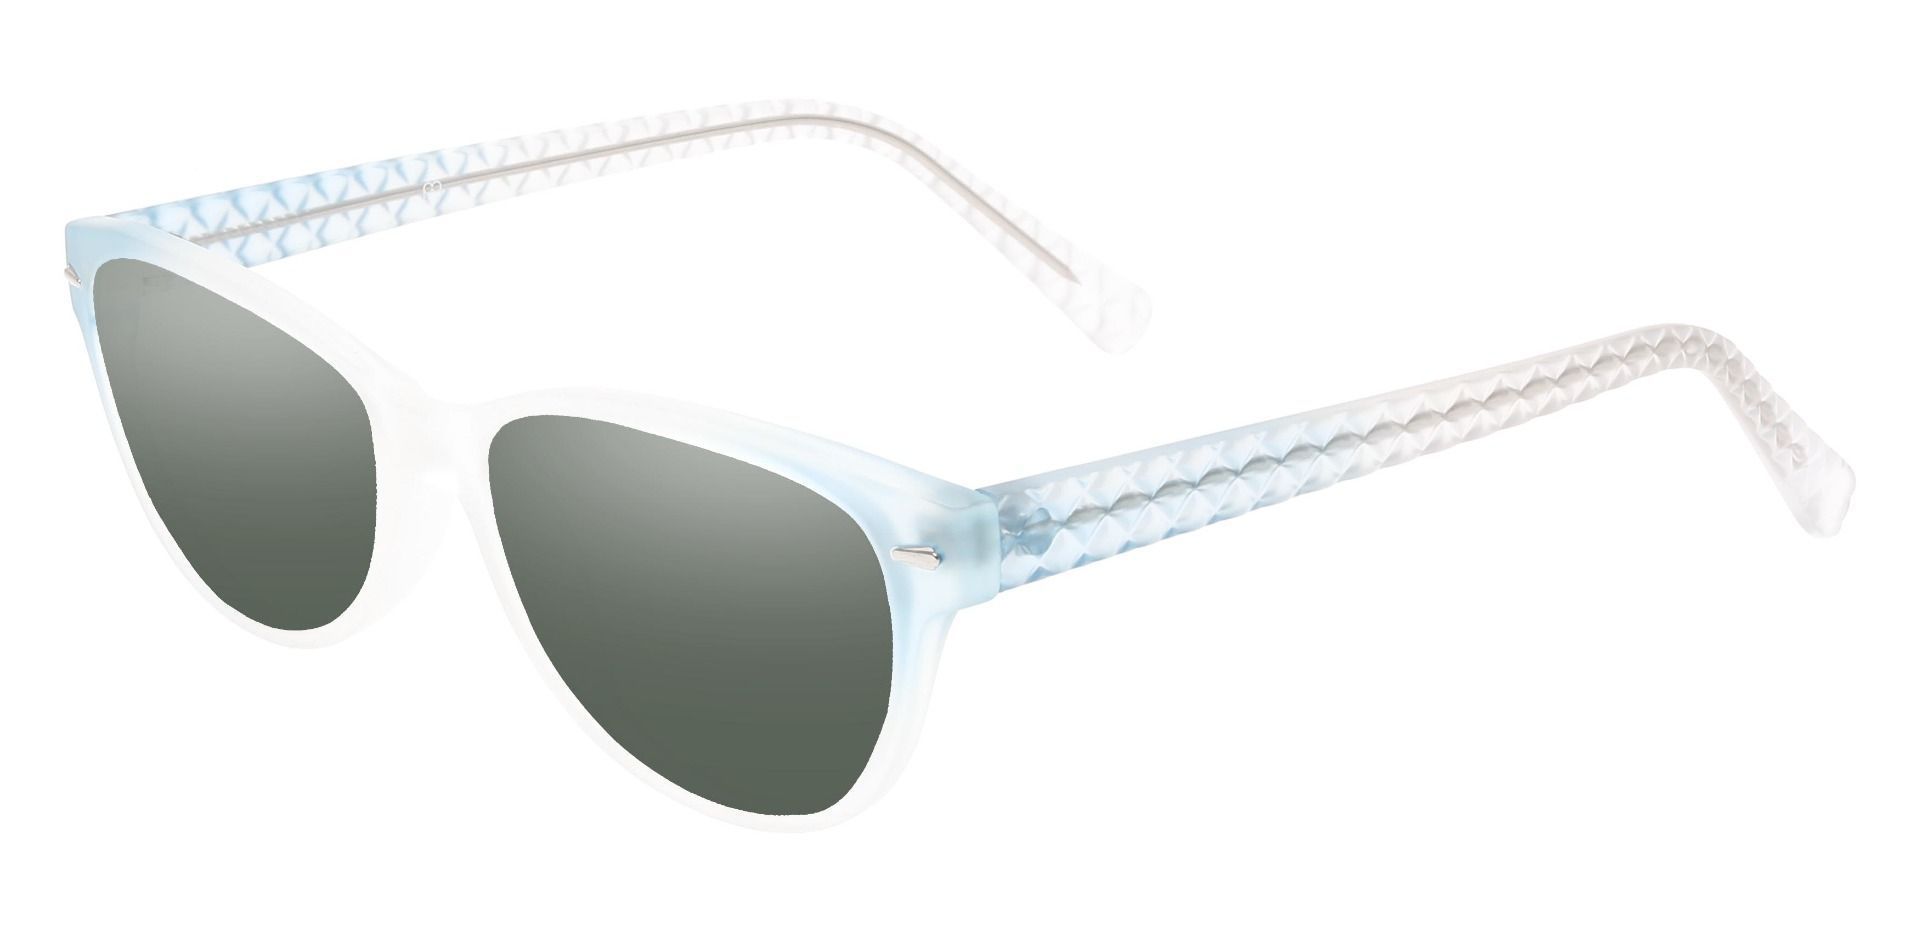 Olive Cat Eye Non-Rx Sunglasses - Blue Frame With Green Lenses